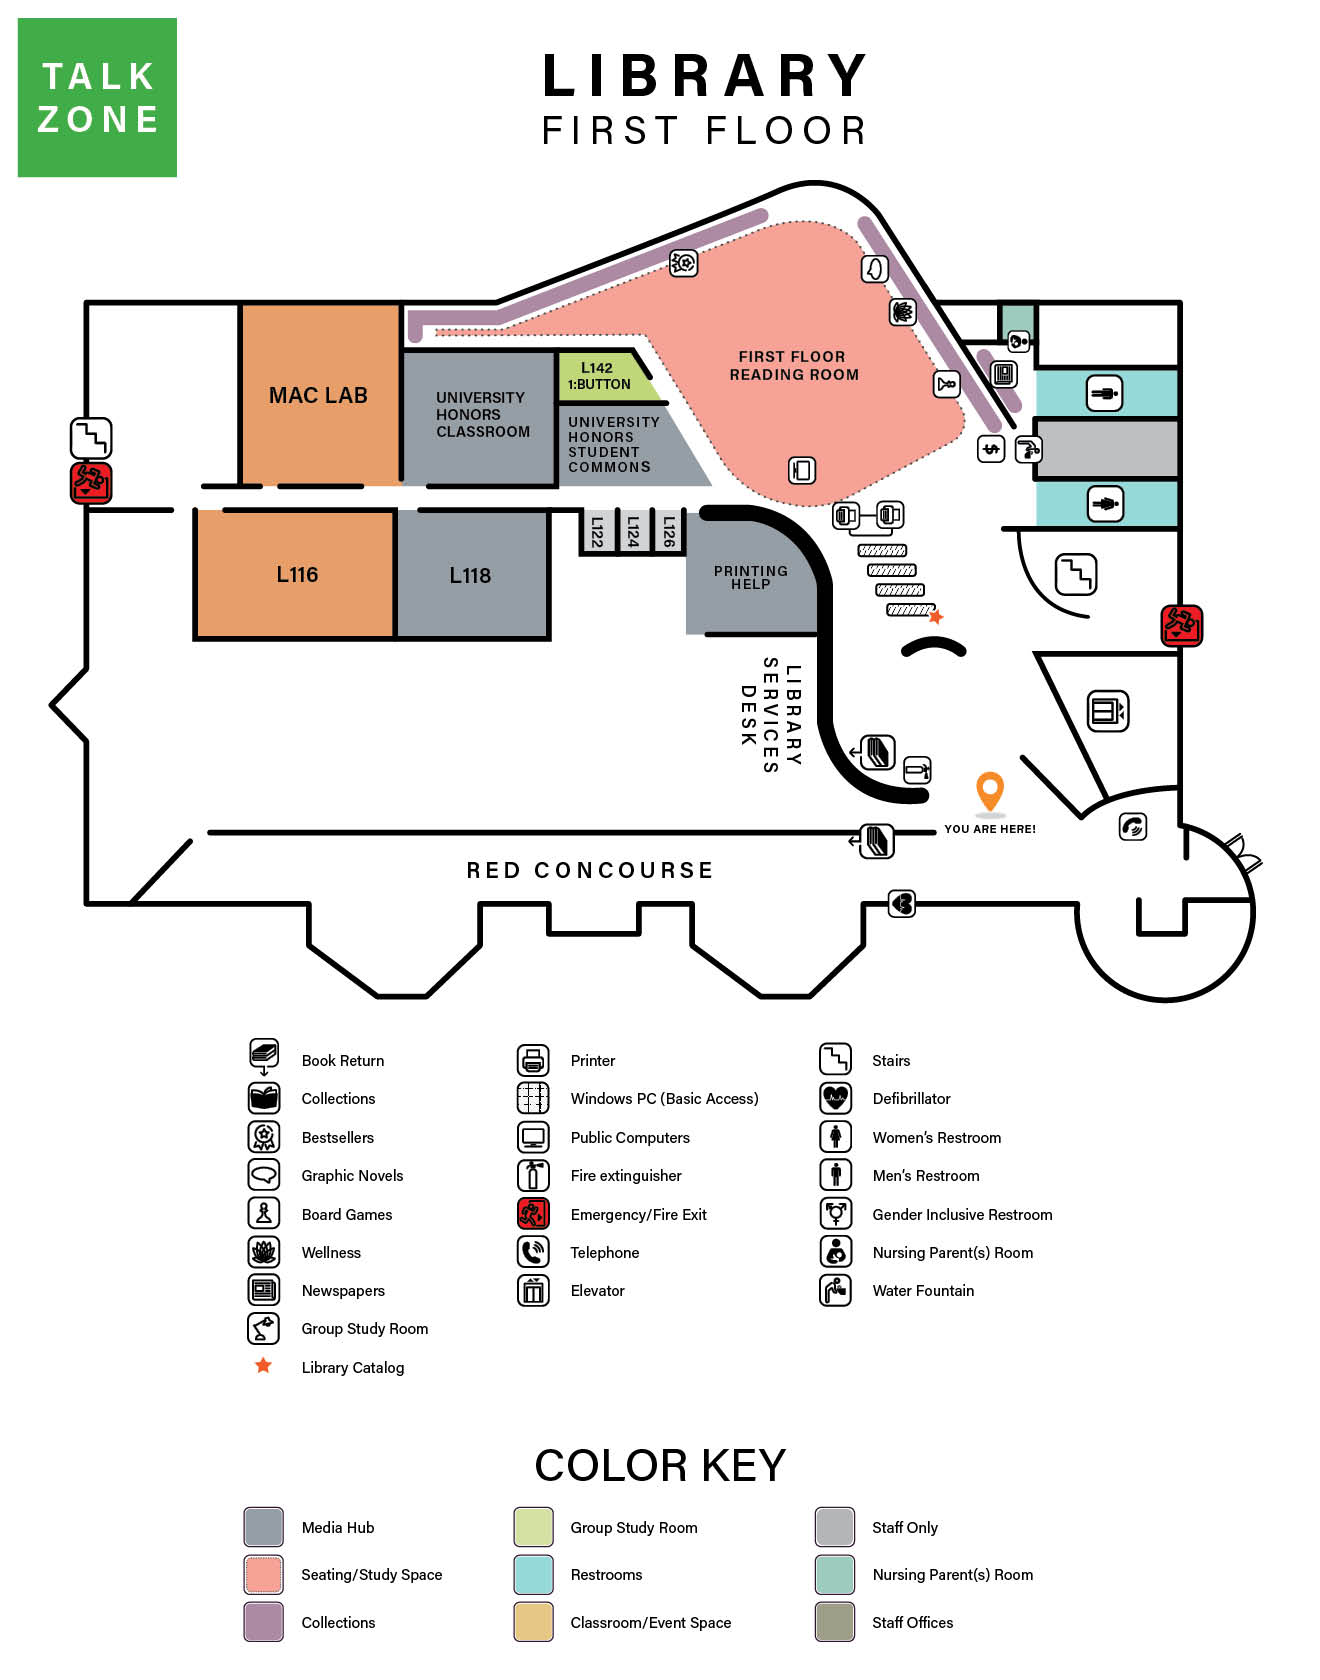 a floor map of of the library first floor, which shows room numbers, and space names, and also includes information such as stairwell access, emergency exits, bathrooms, etc.